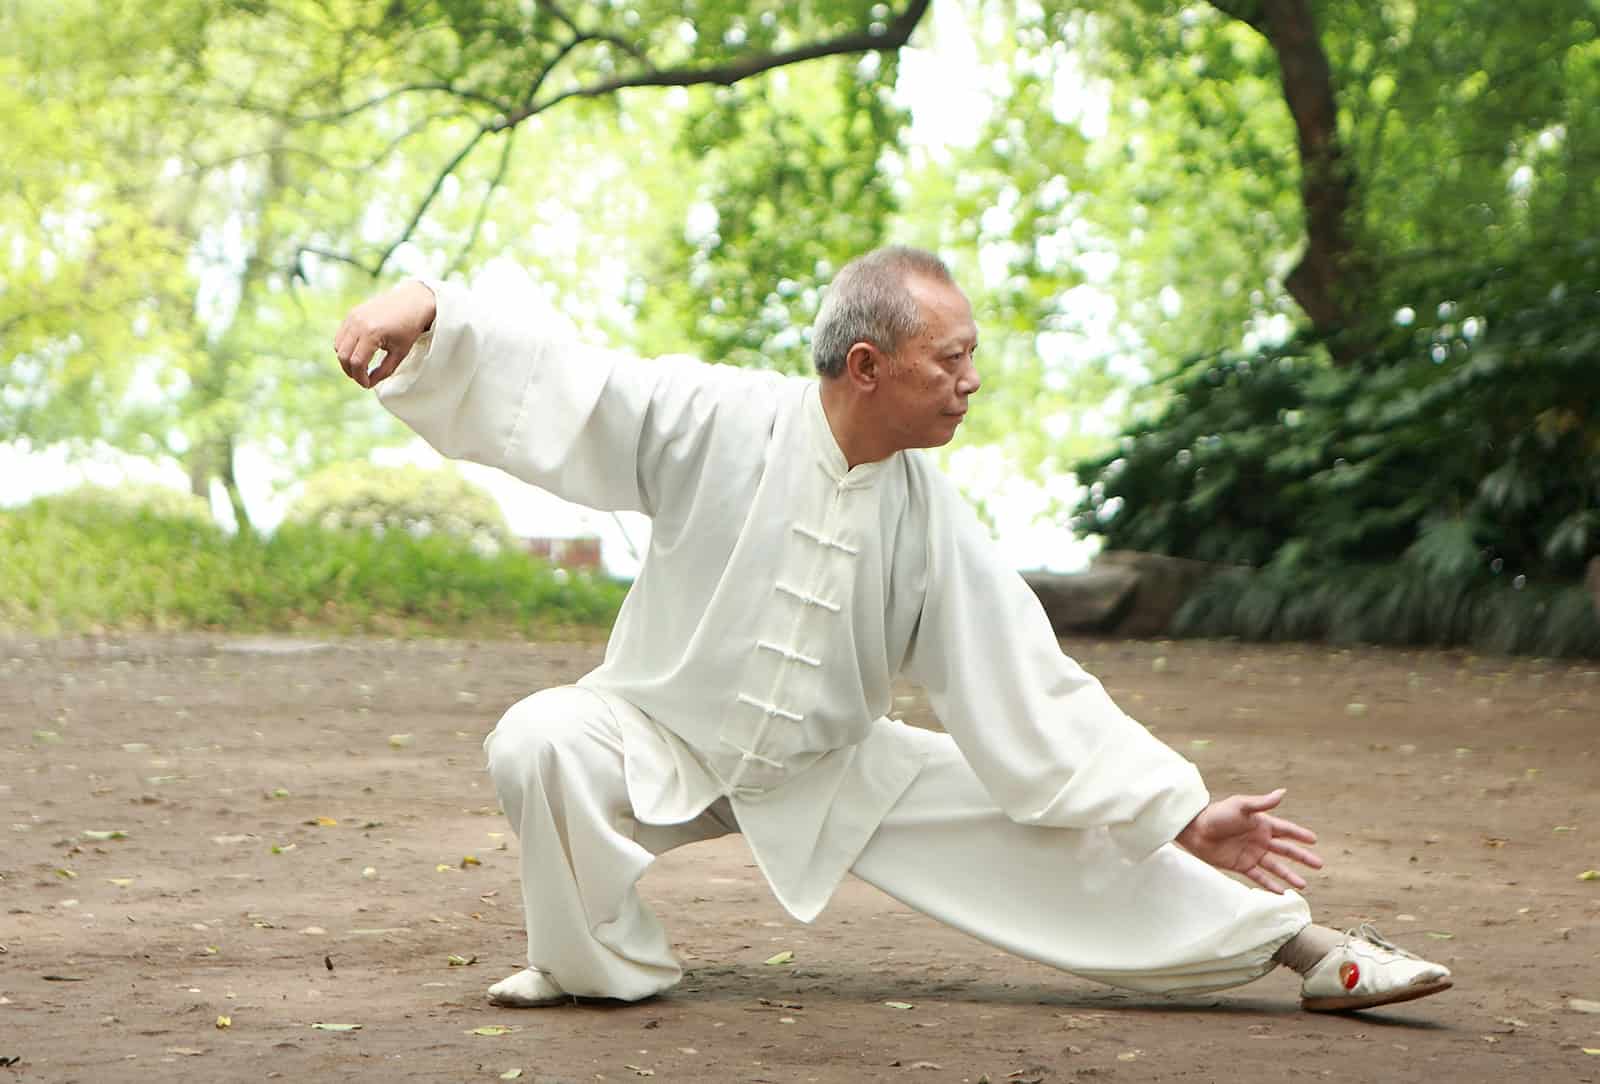 tai-chi-exercises-health-benefits-how-to-practice-side-effects